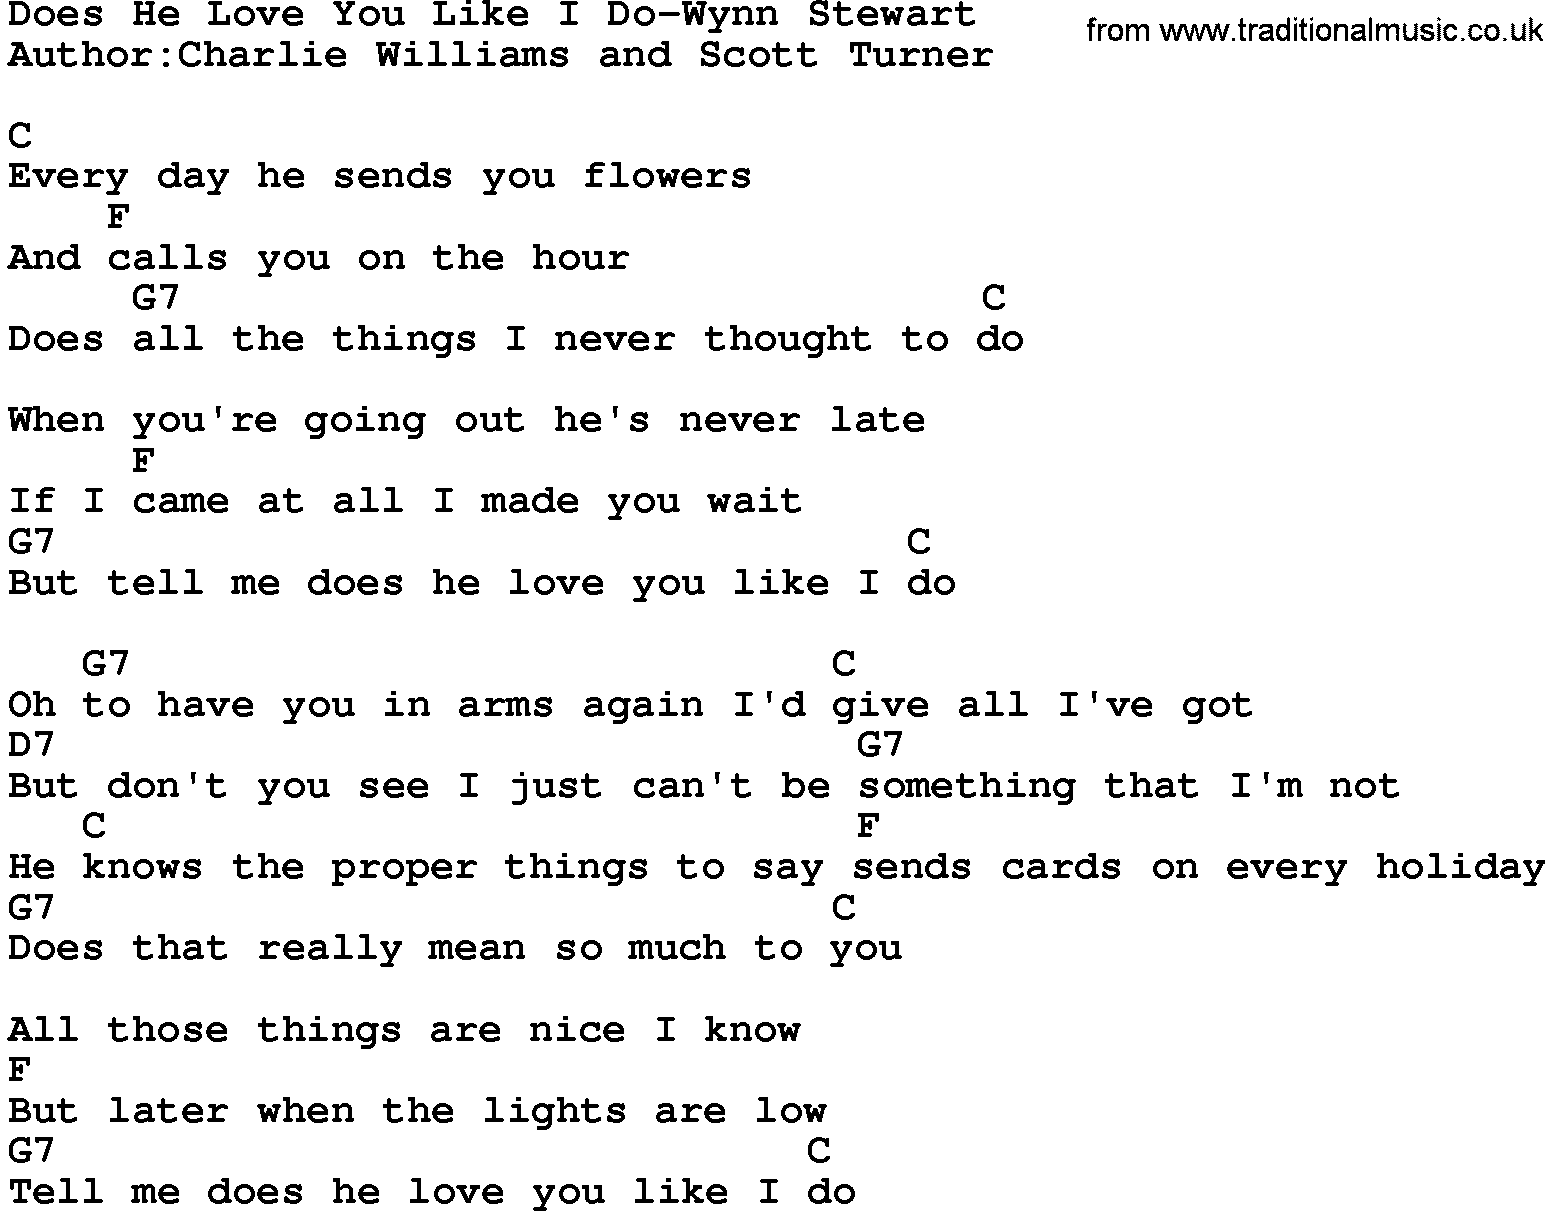 Country music song: Does He Love You Like I Do-Wynn Stewart lyrics and chords